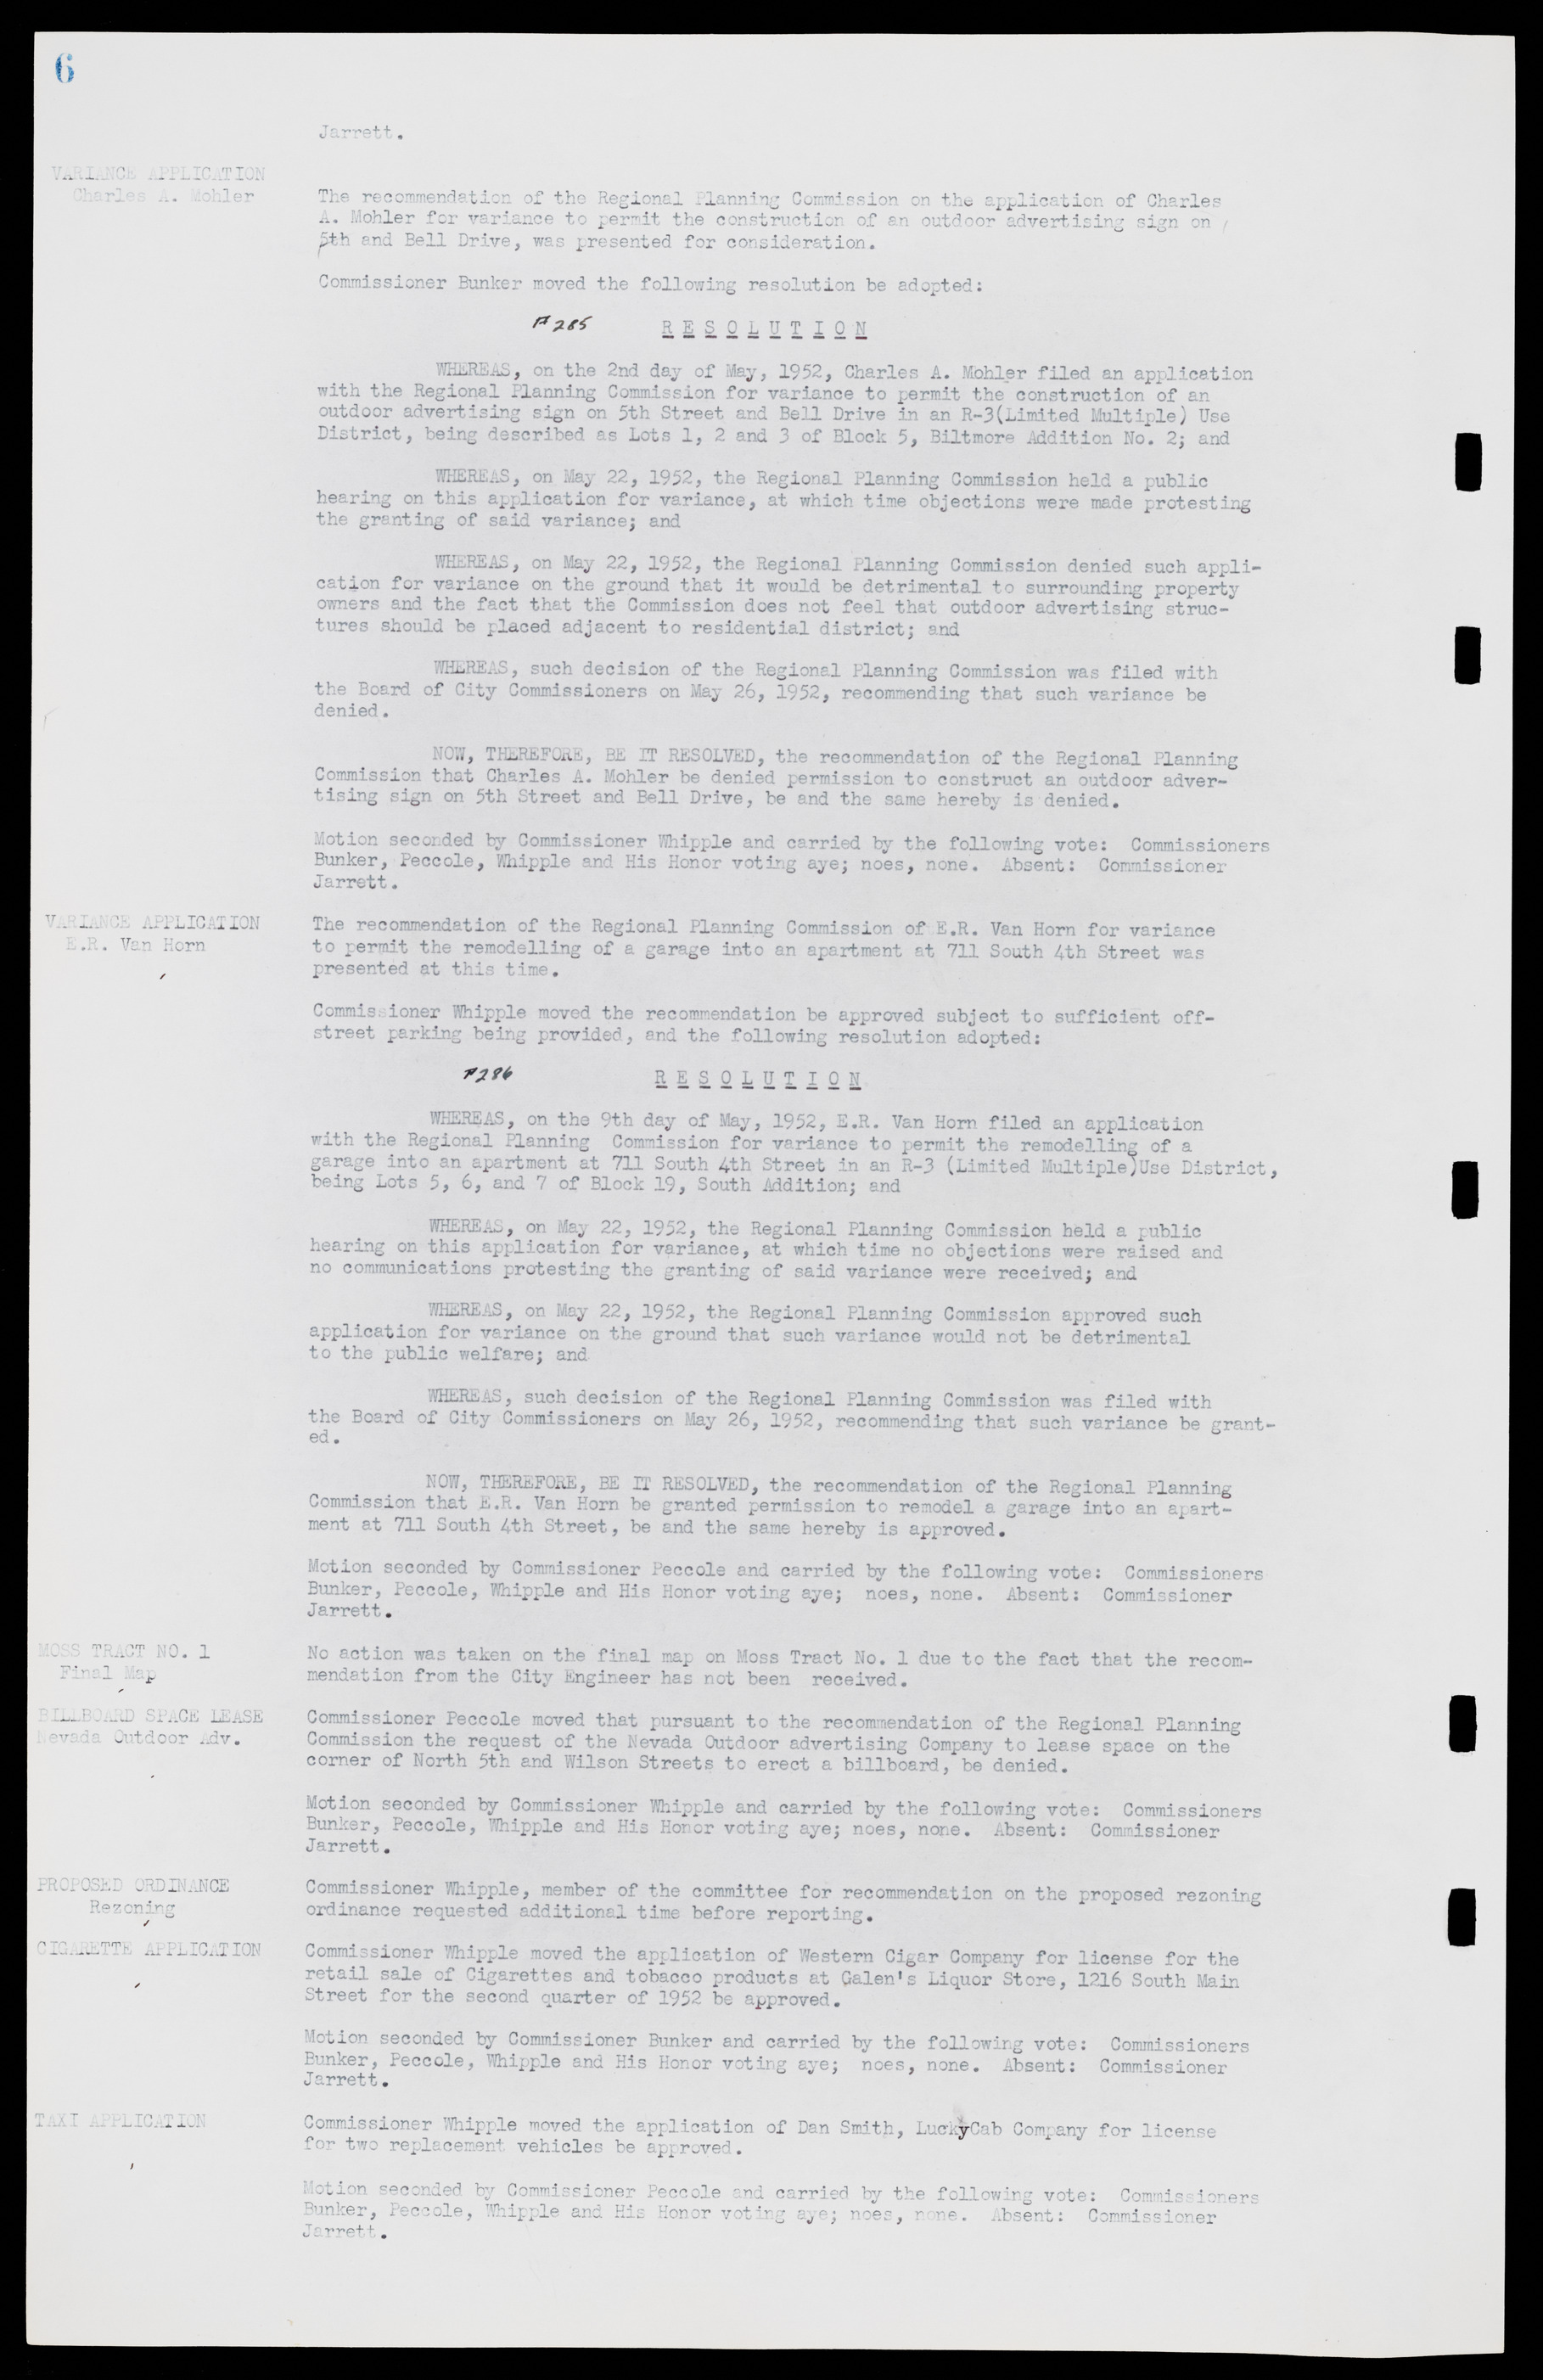 Las Vegas City Commission Minutes, May 26, 1952 to February 17, 1954, lvc000008-10